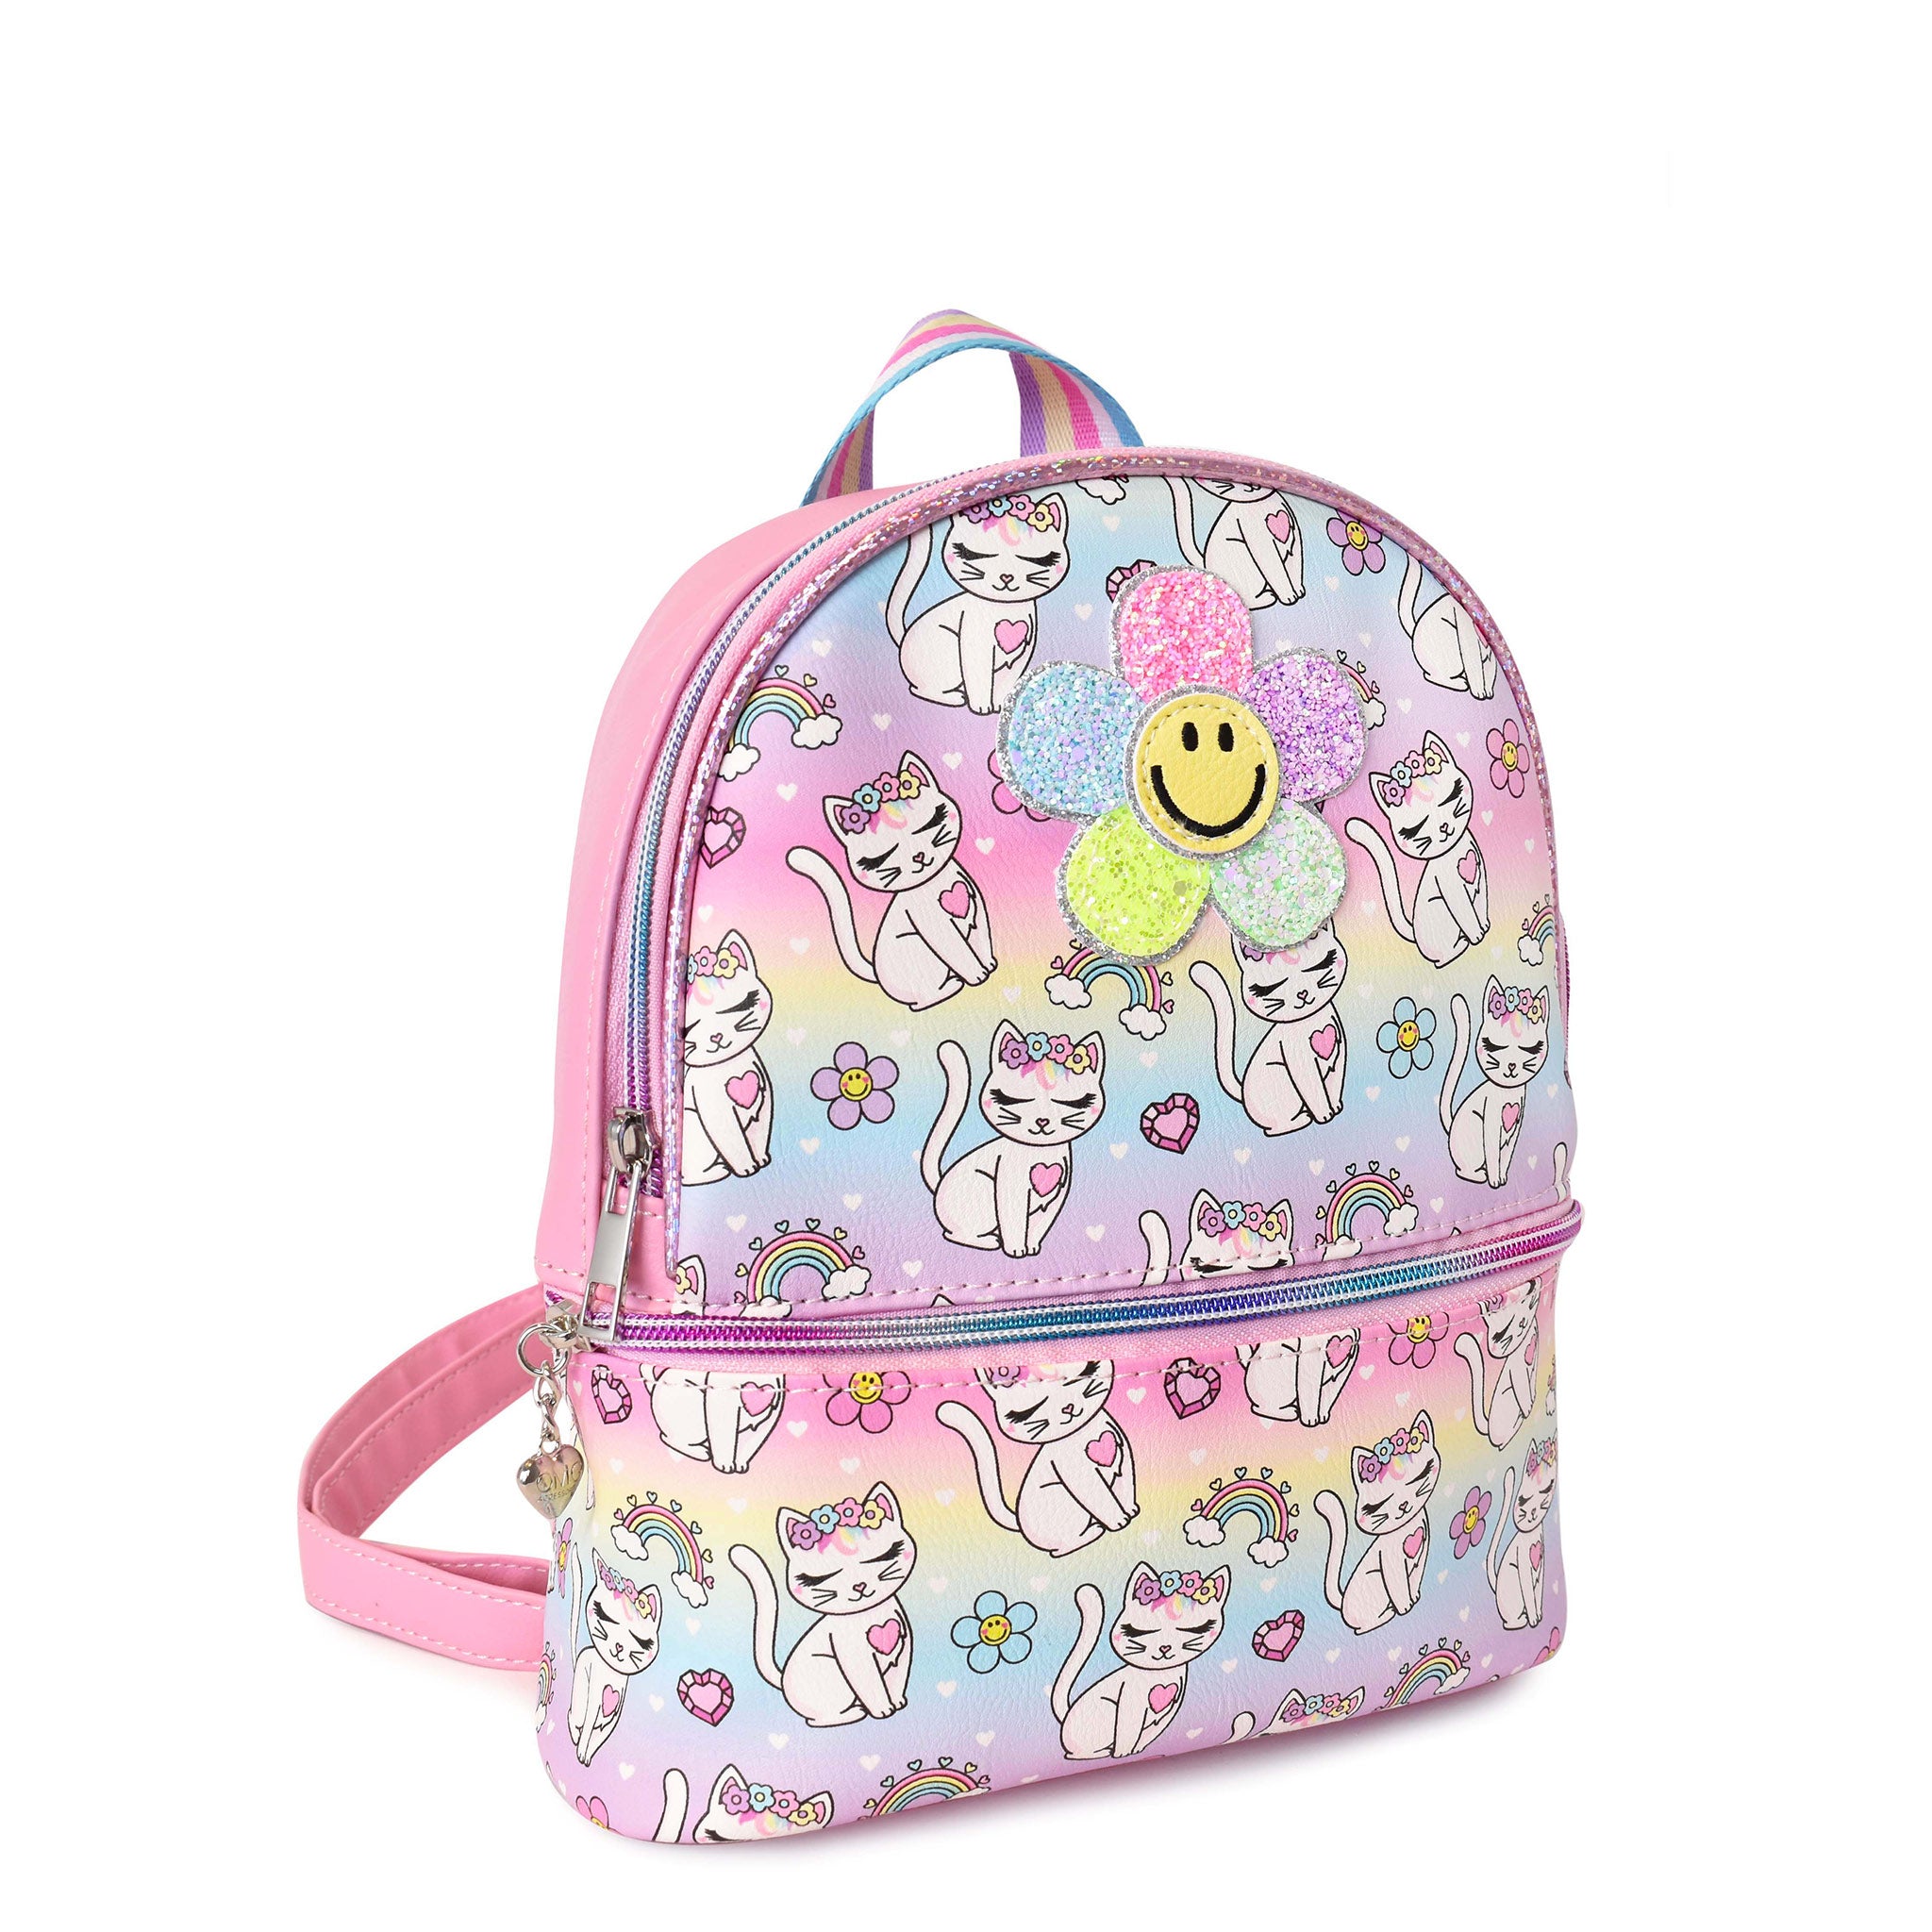 Side  view of a kitty cat and rainbow printed mini backpack with a glitter smiley face daisy appliqué